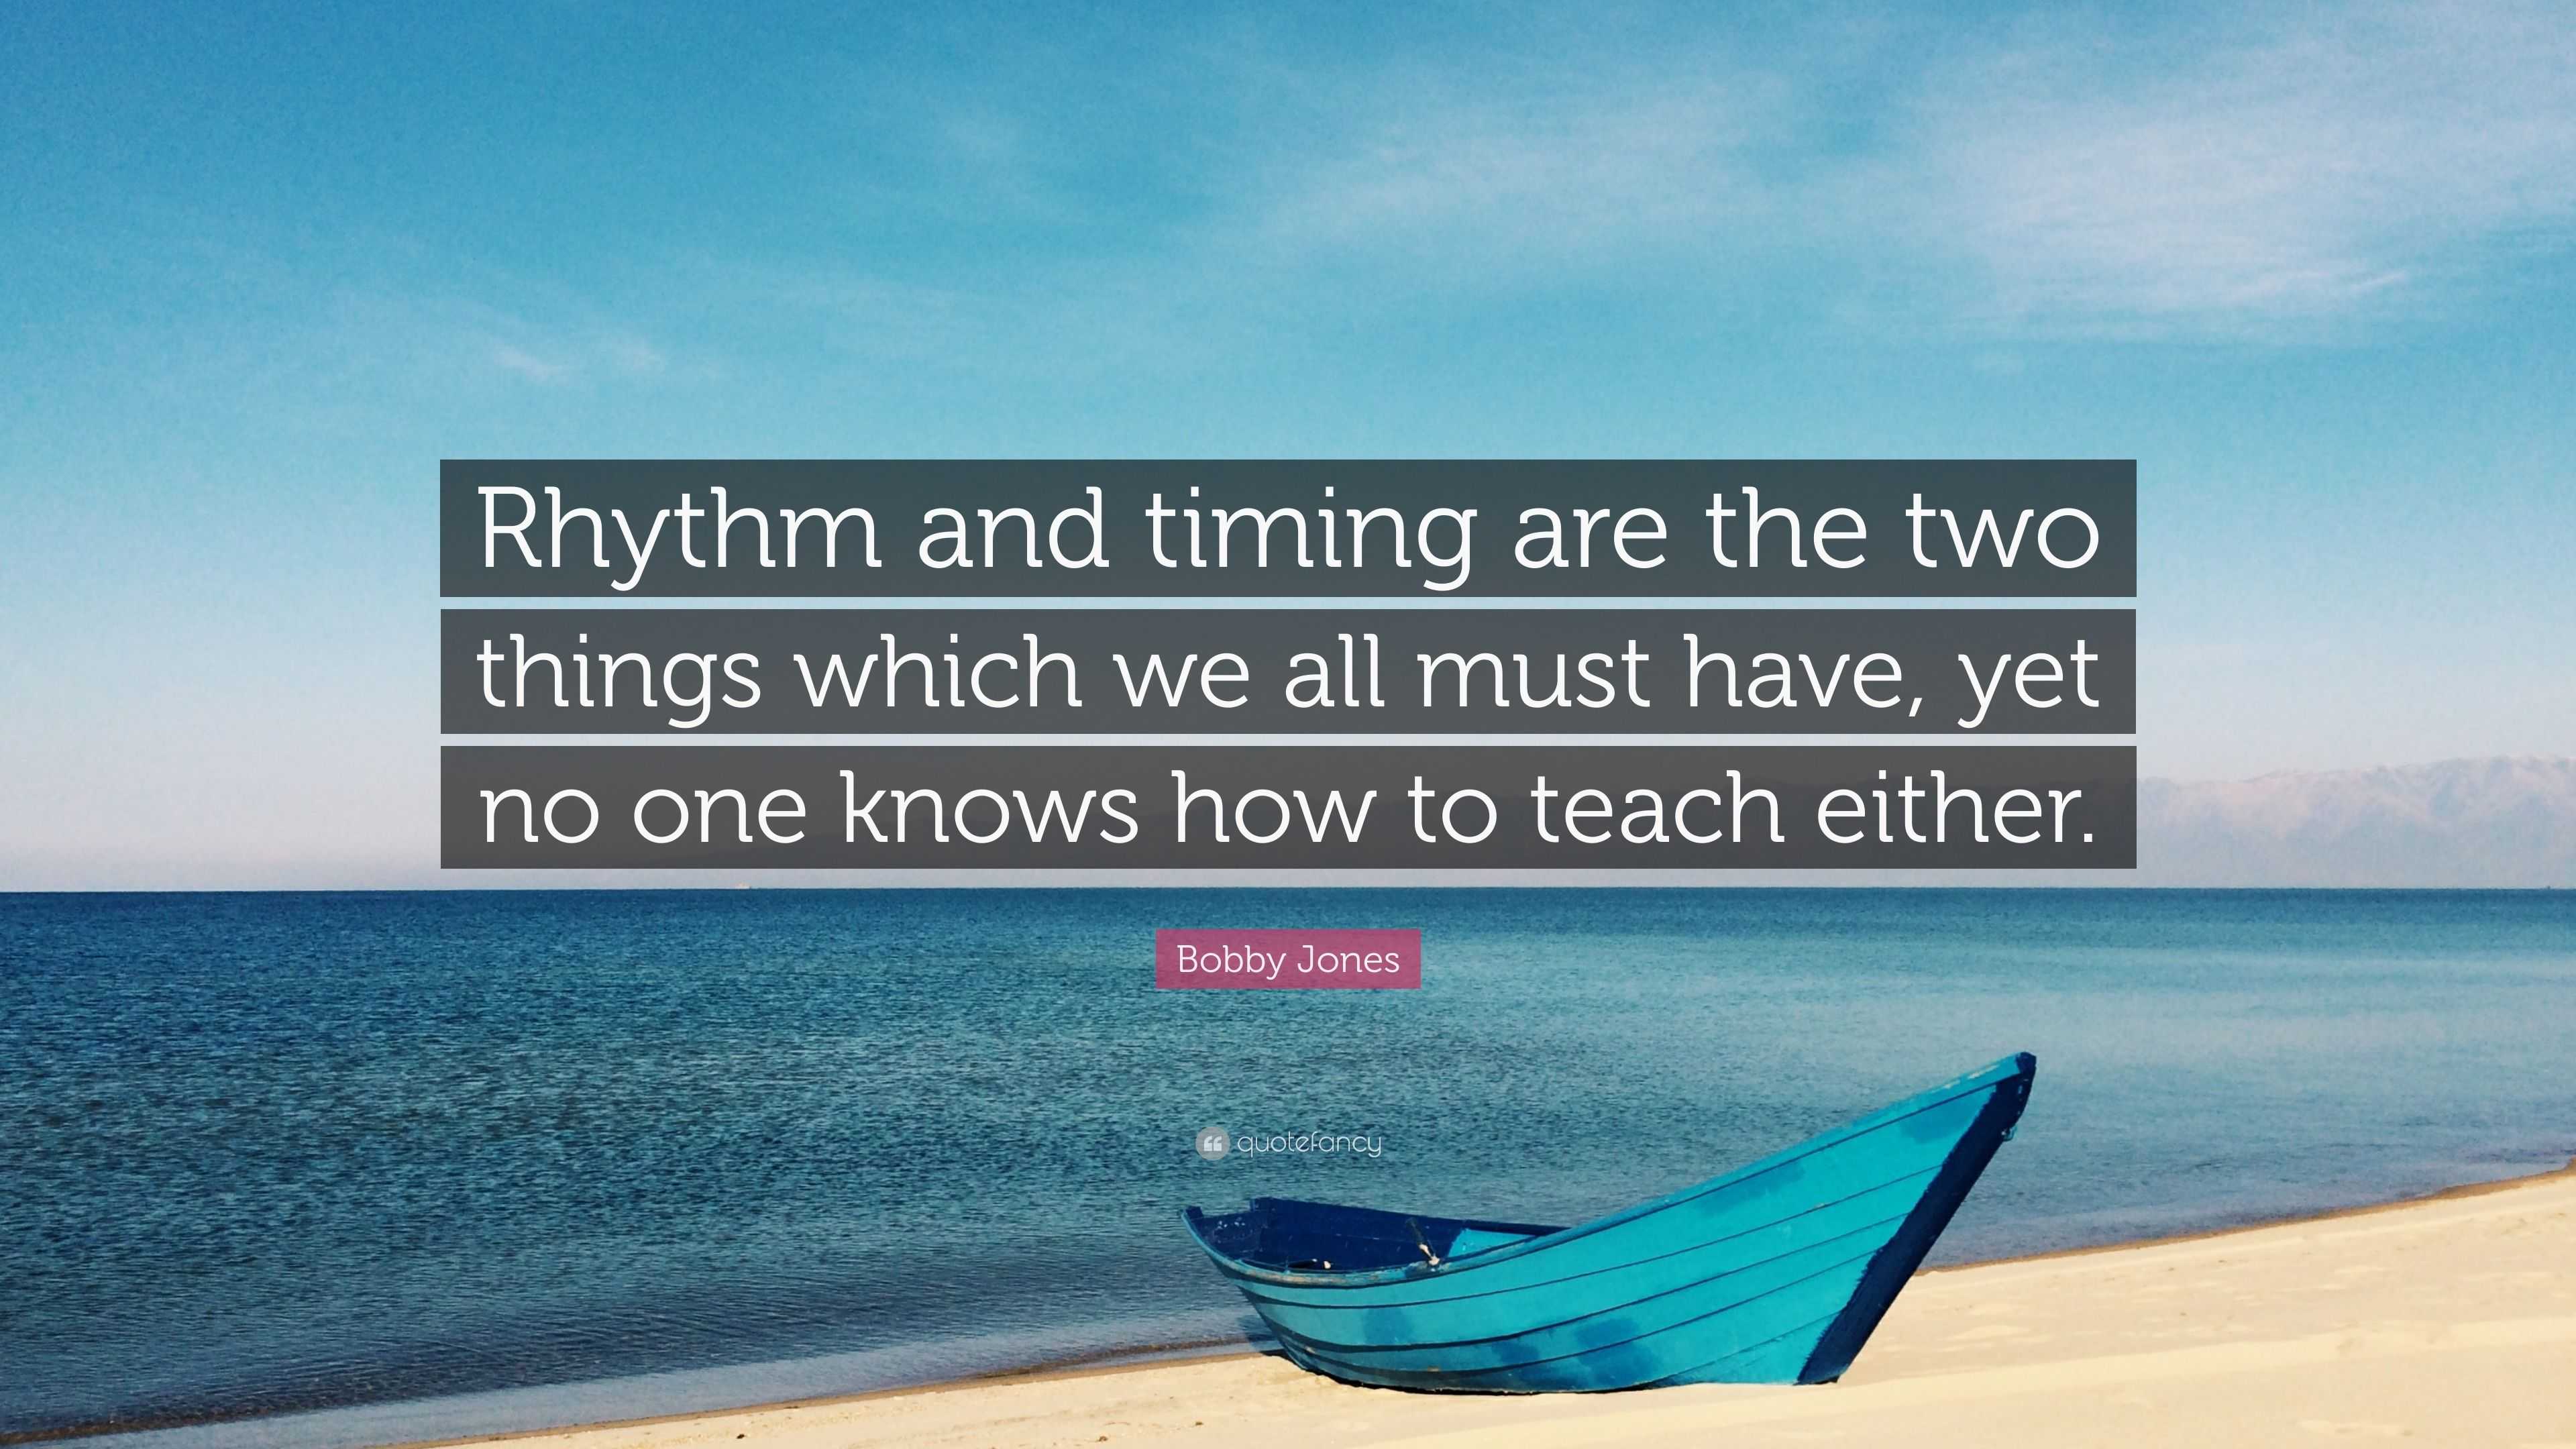 Bobby Jones Quote: “Rhythm and timing are the two things which we